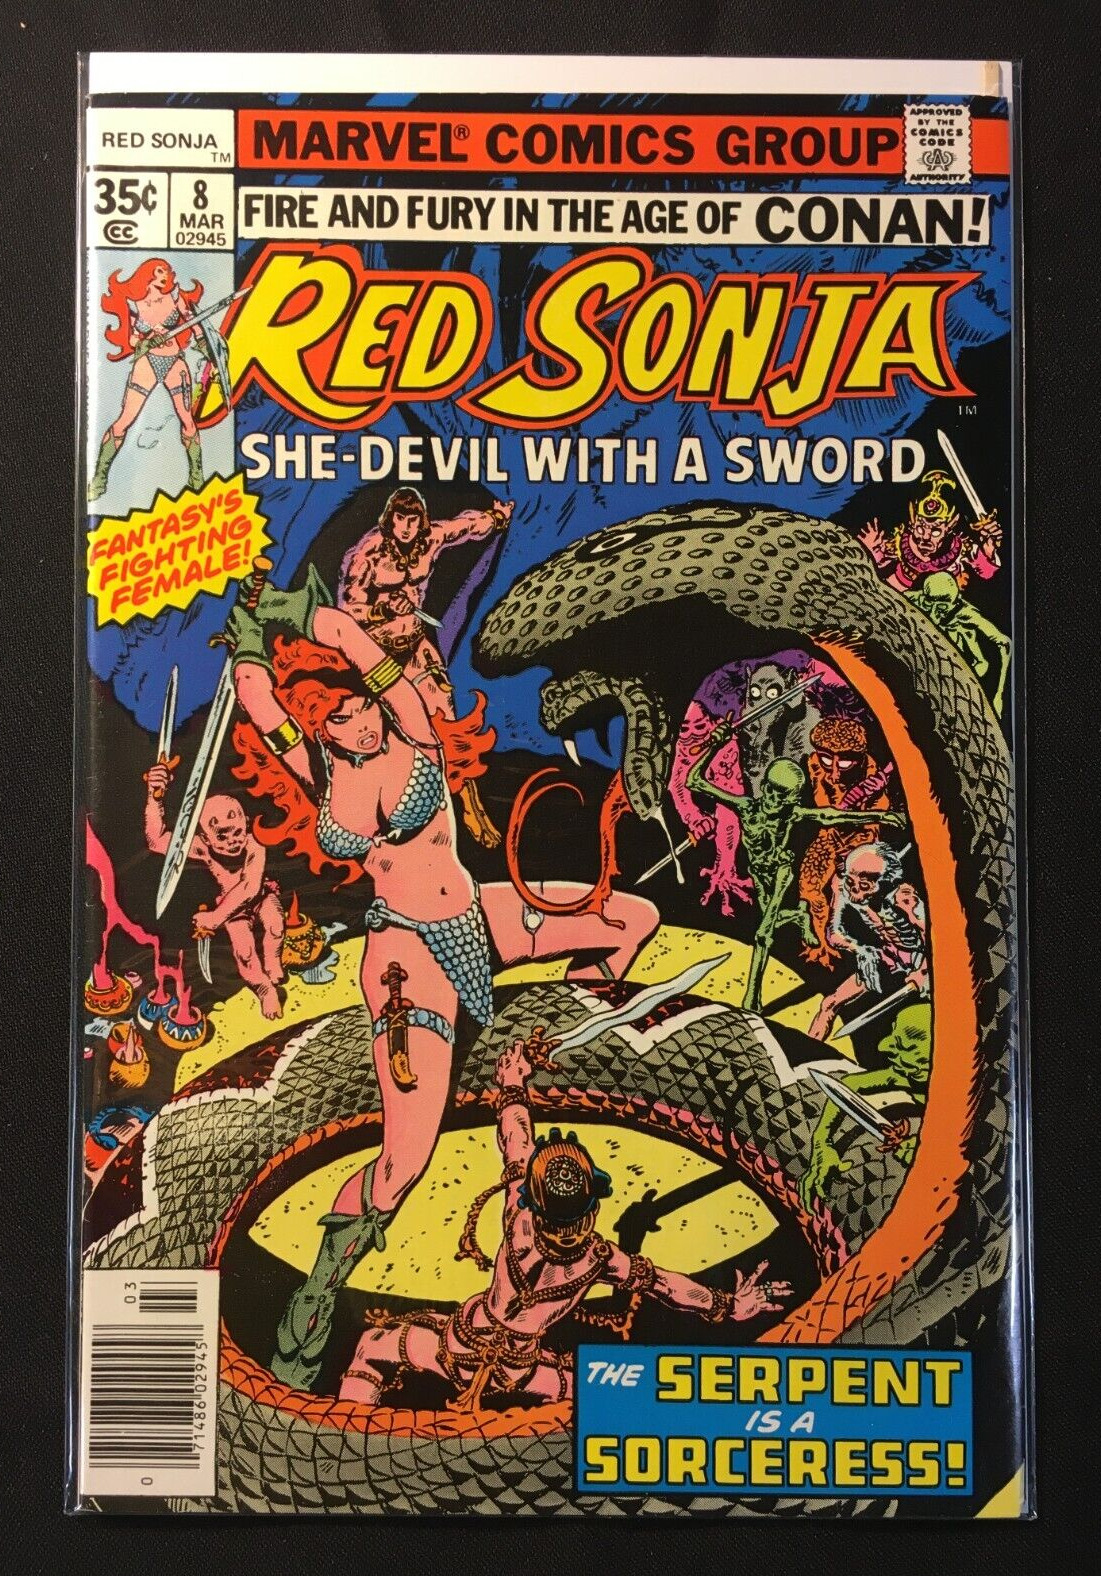 RED SONJA 8 FRANK THORNE SERPENT SORCERESS VOL 1 ANGELS FROM HELL AGE OF CONAN